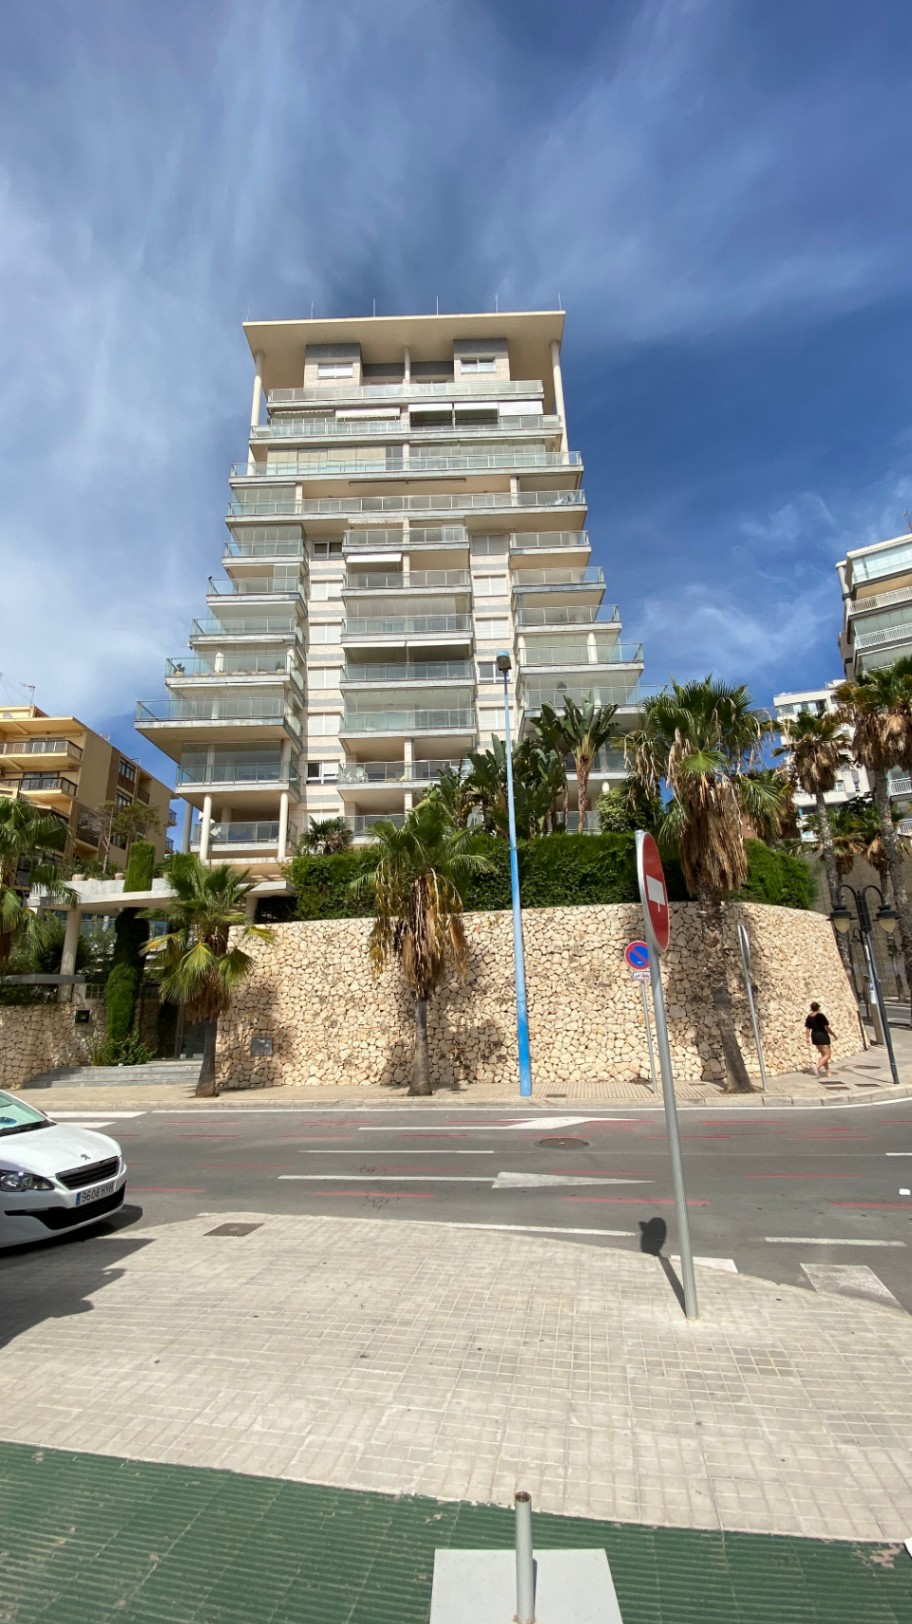 For sale a spectacular spacious apartment with panoramic views of the sea, port of Calpe and Peñon de Ifach